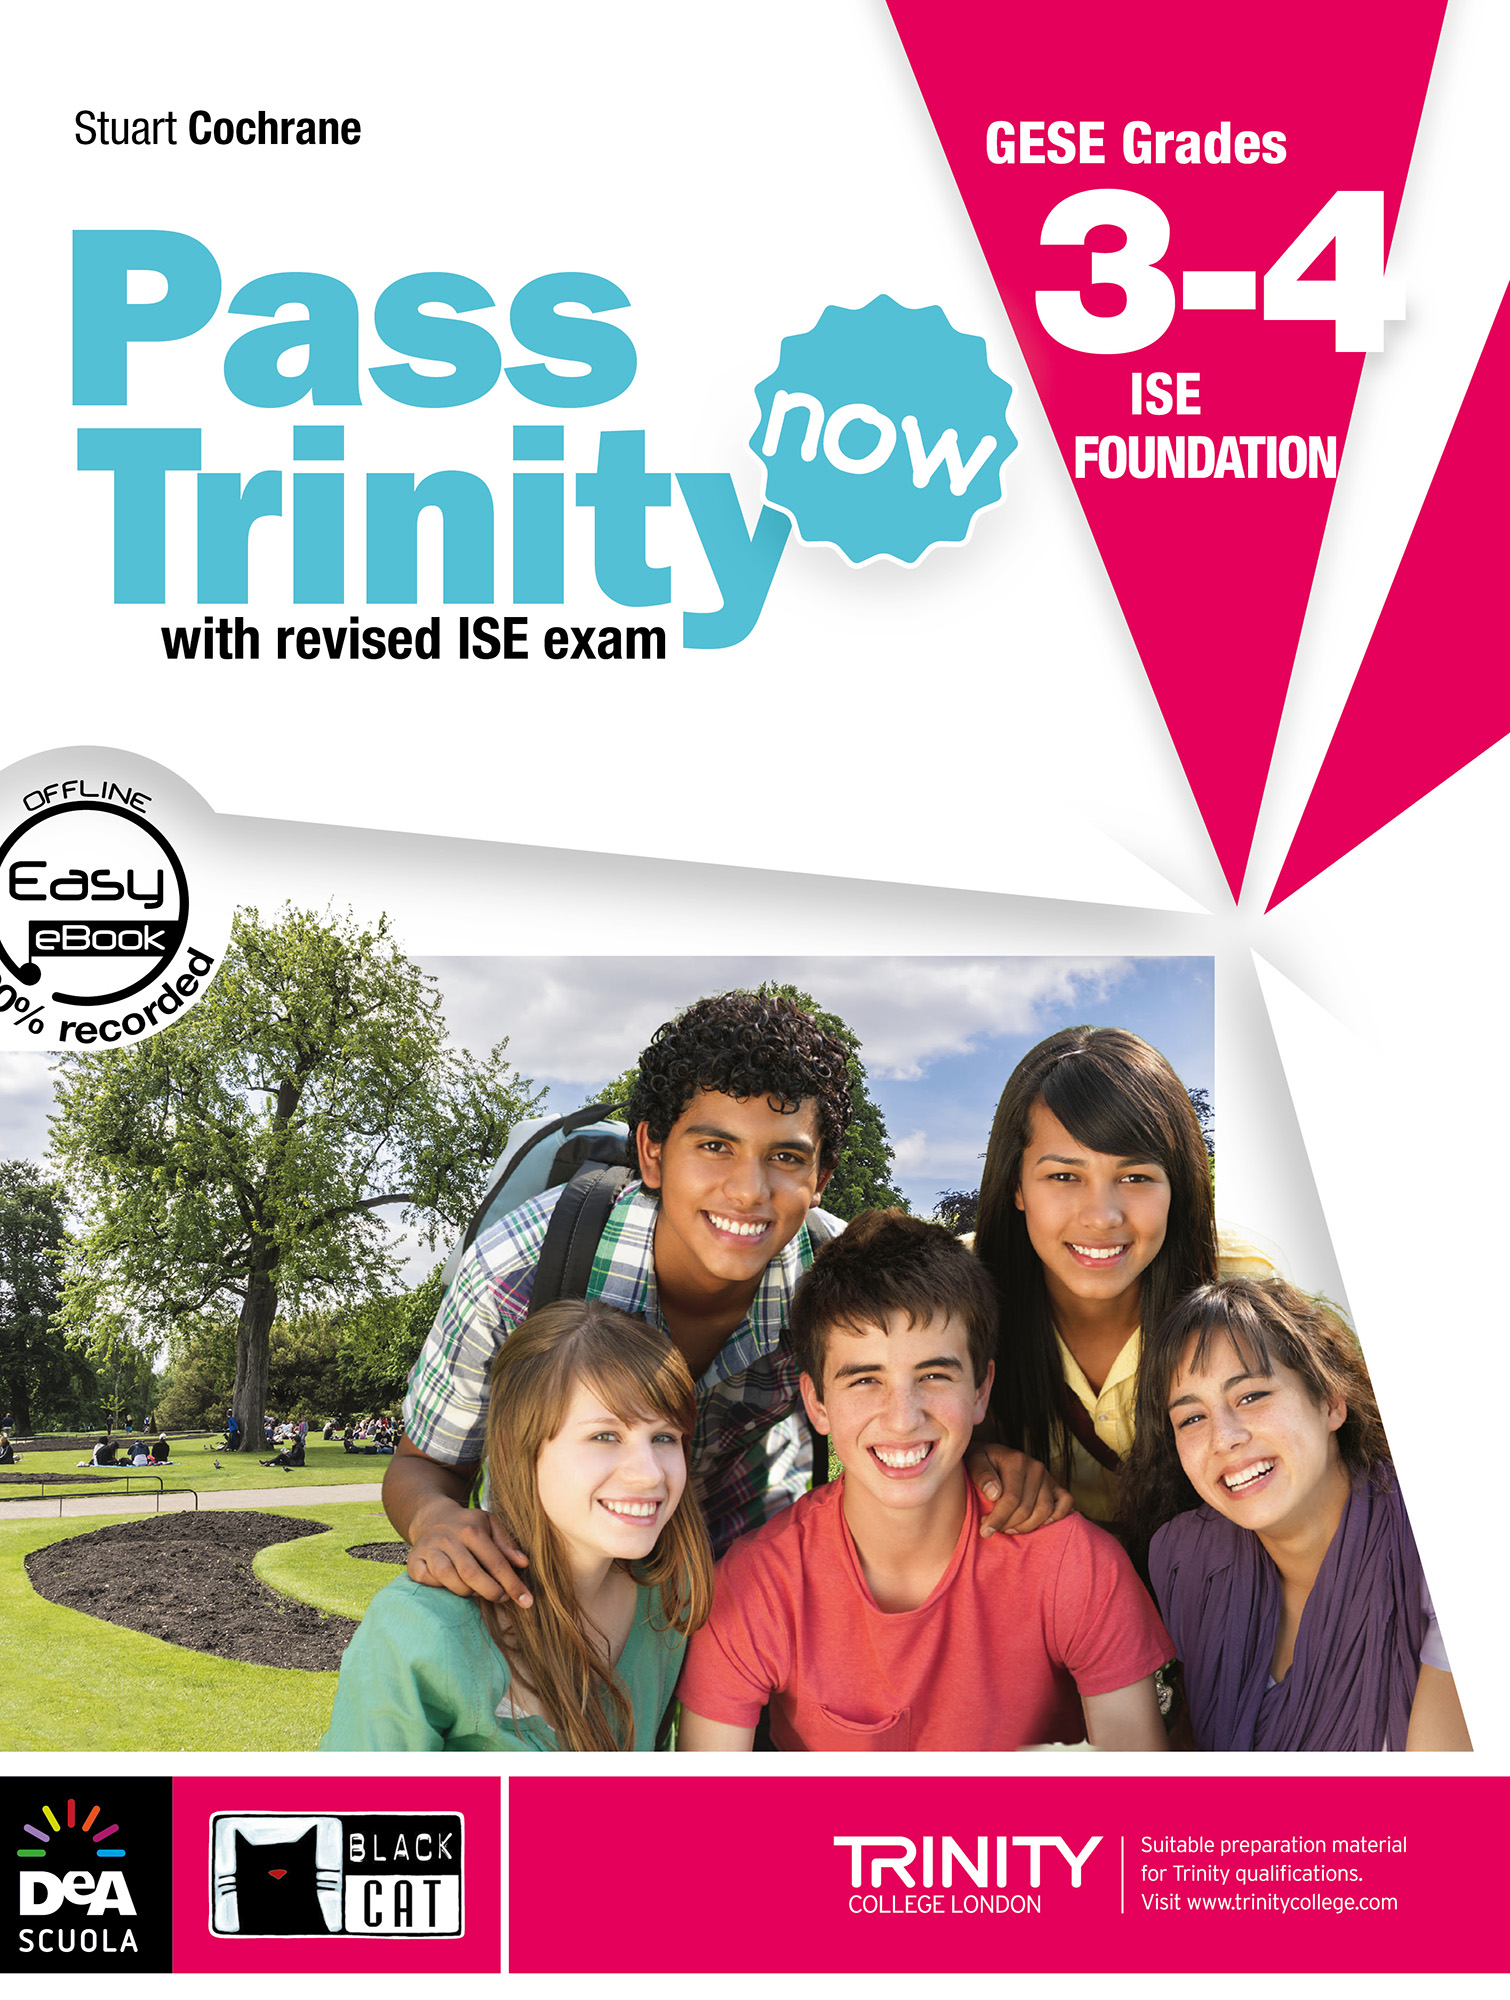 Pass Trinity now 3-4 ISE Foundation